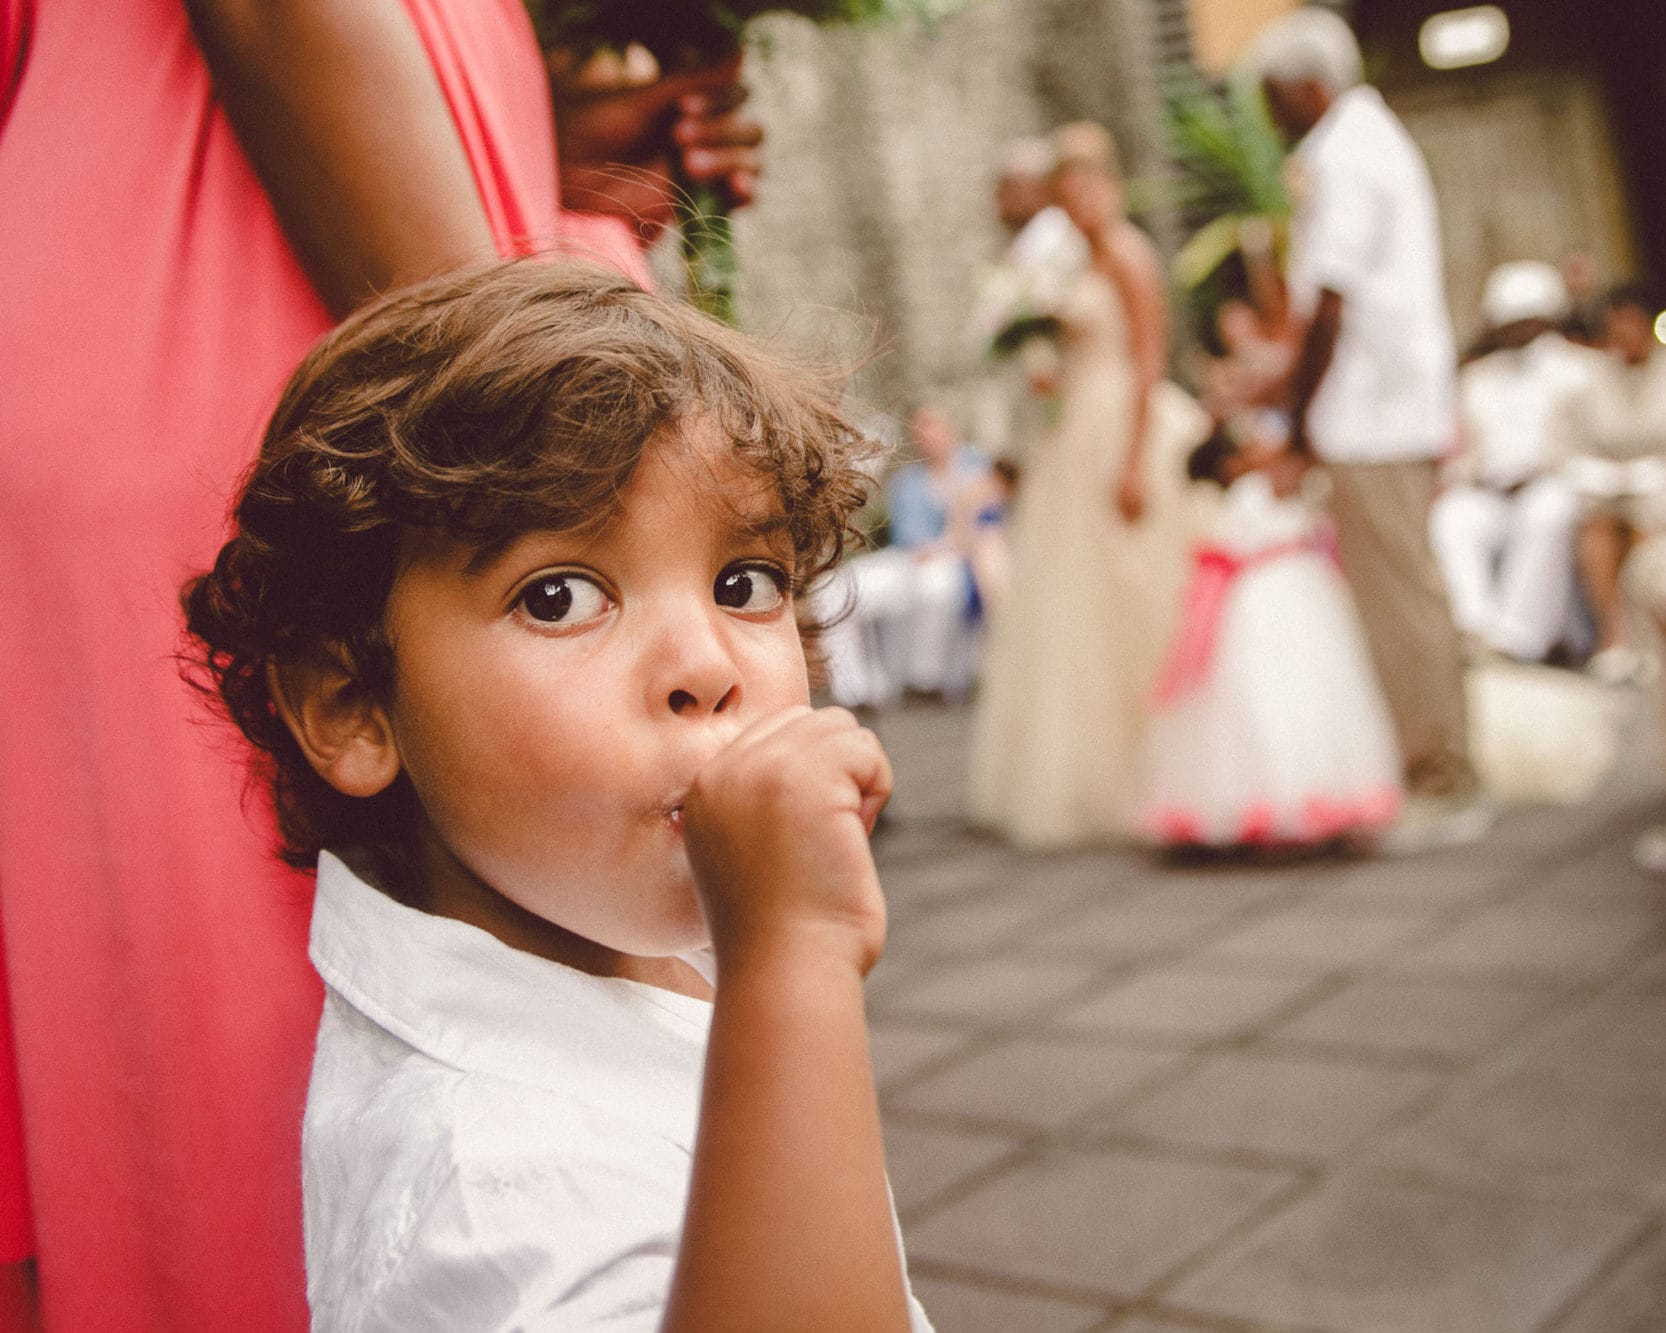 Shooting Costa Rica Weddings from Another Perspective